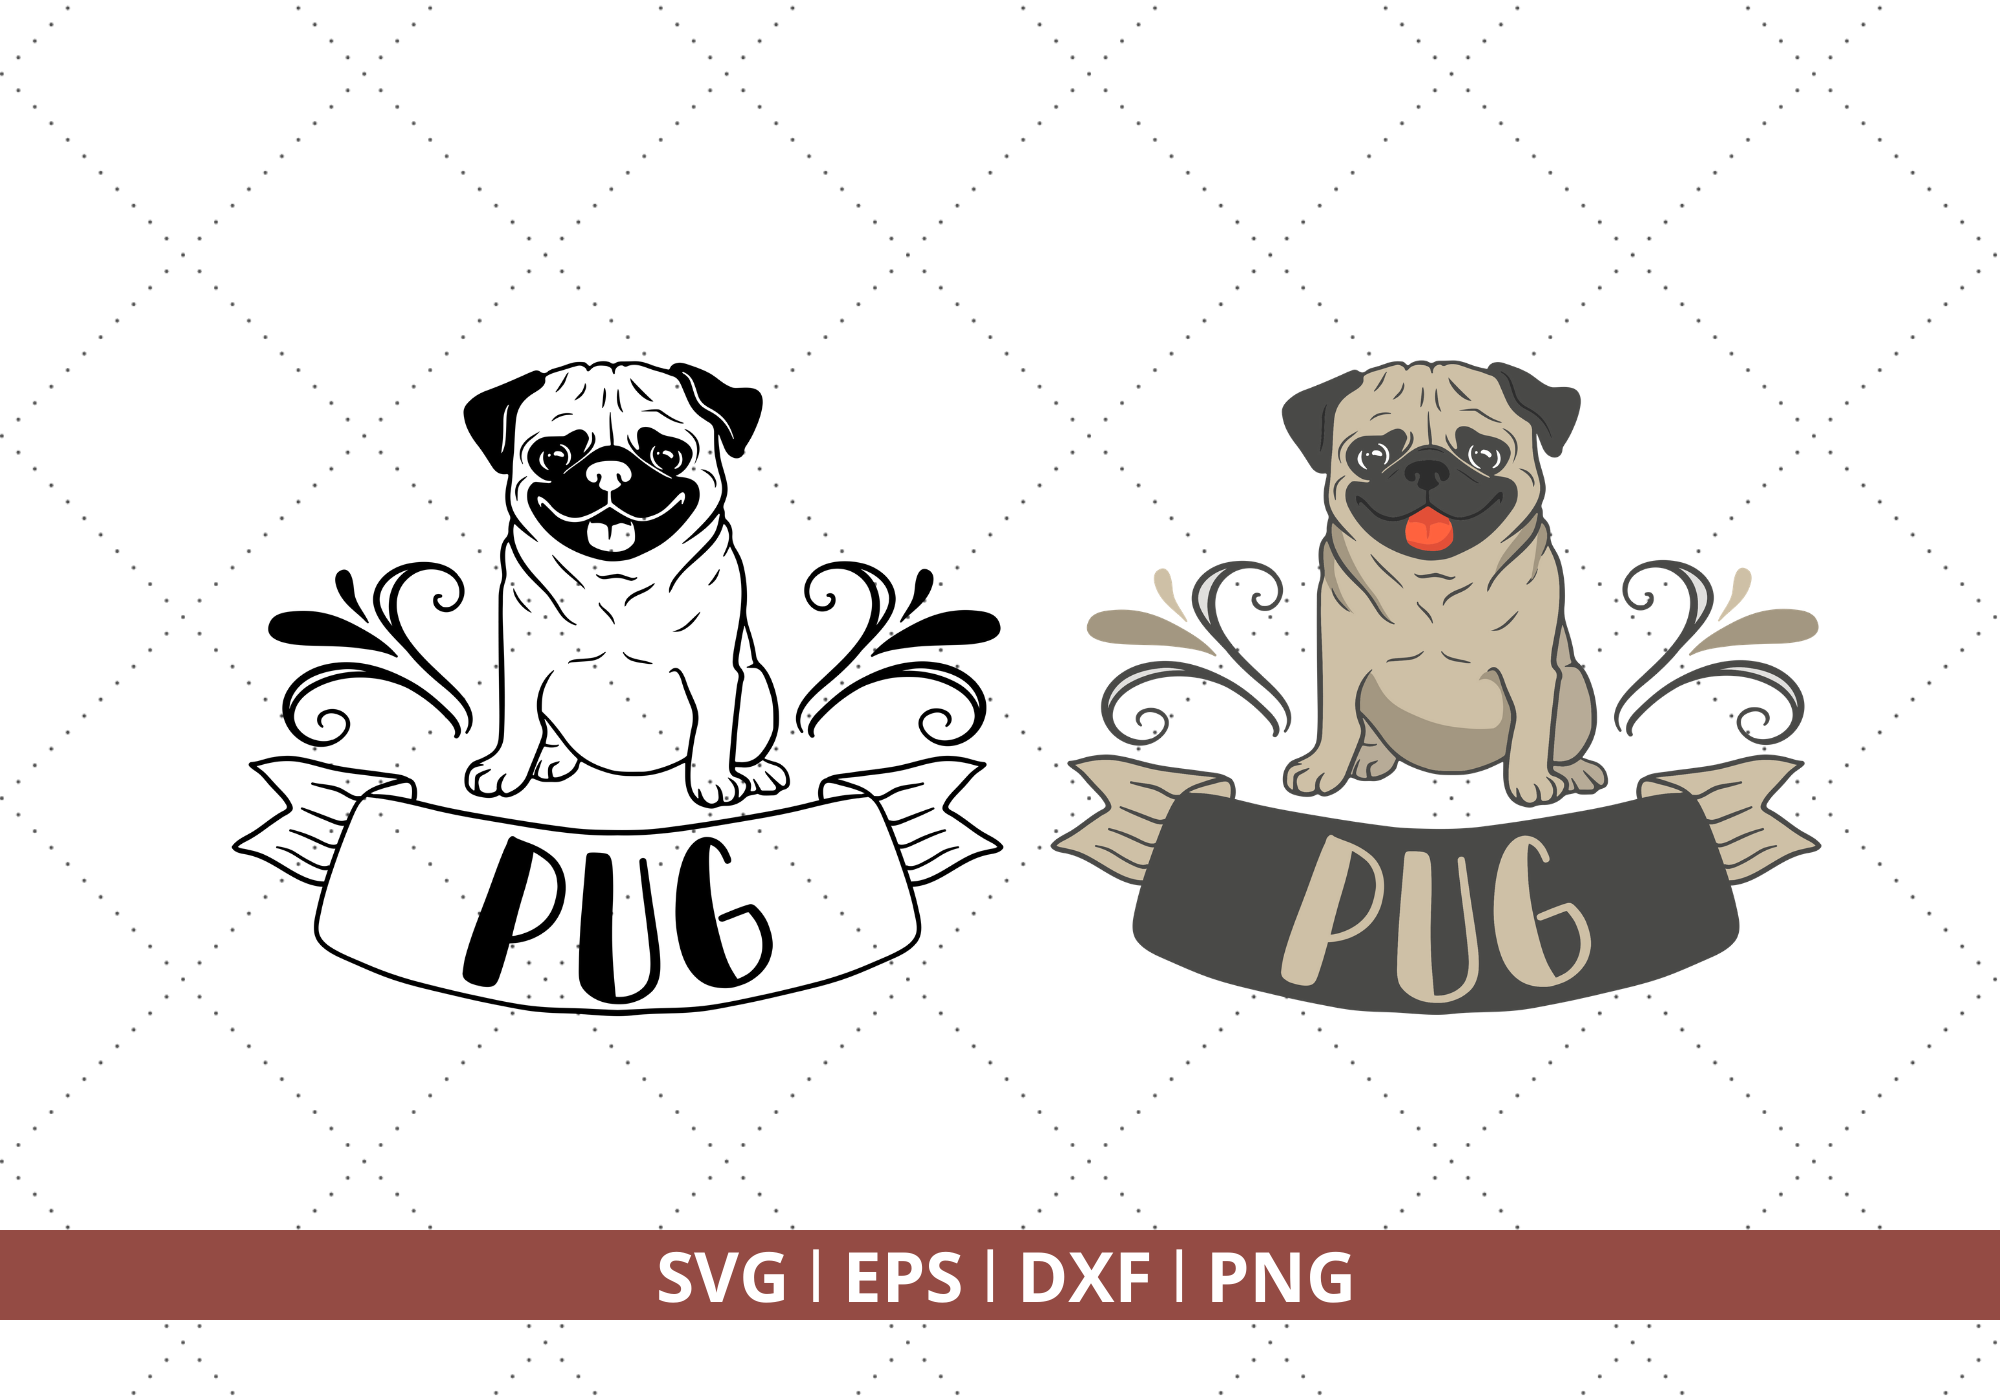 Download Free Best Free Svg Cut Files For Cricut Silhouette Svg Cut French Bulldog Svg Free PSD Mockup Template